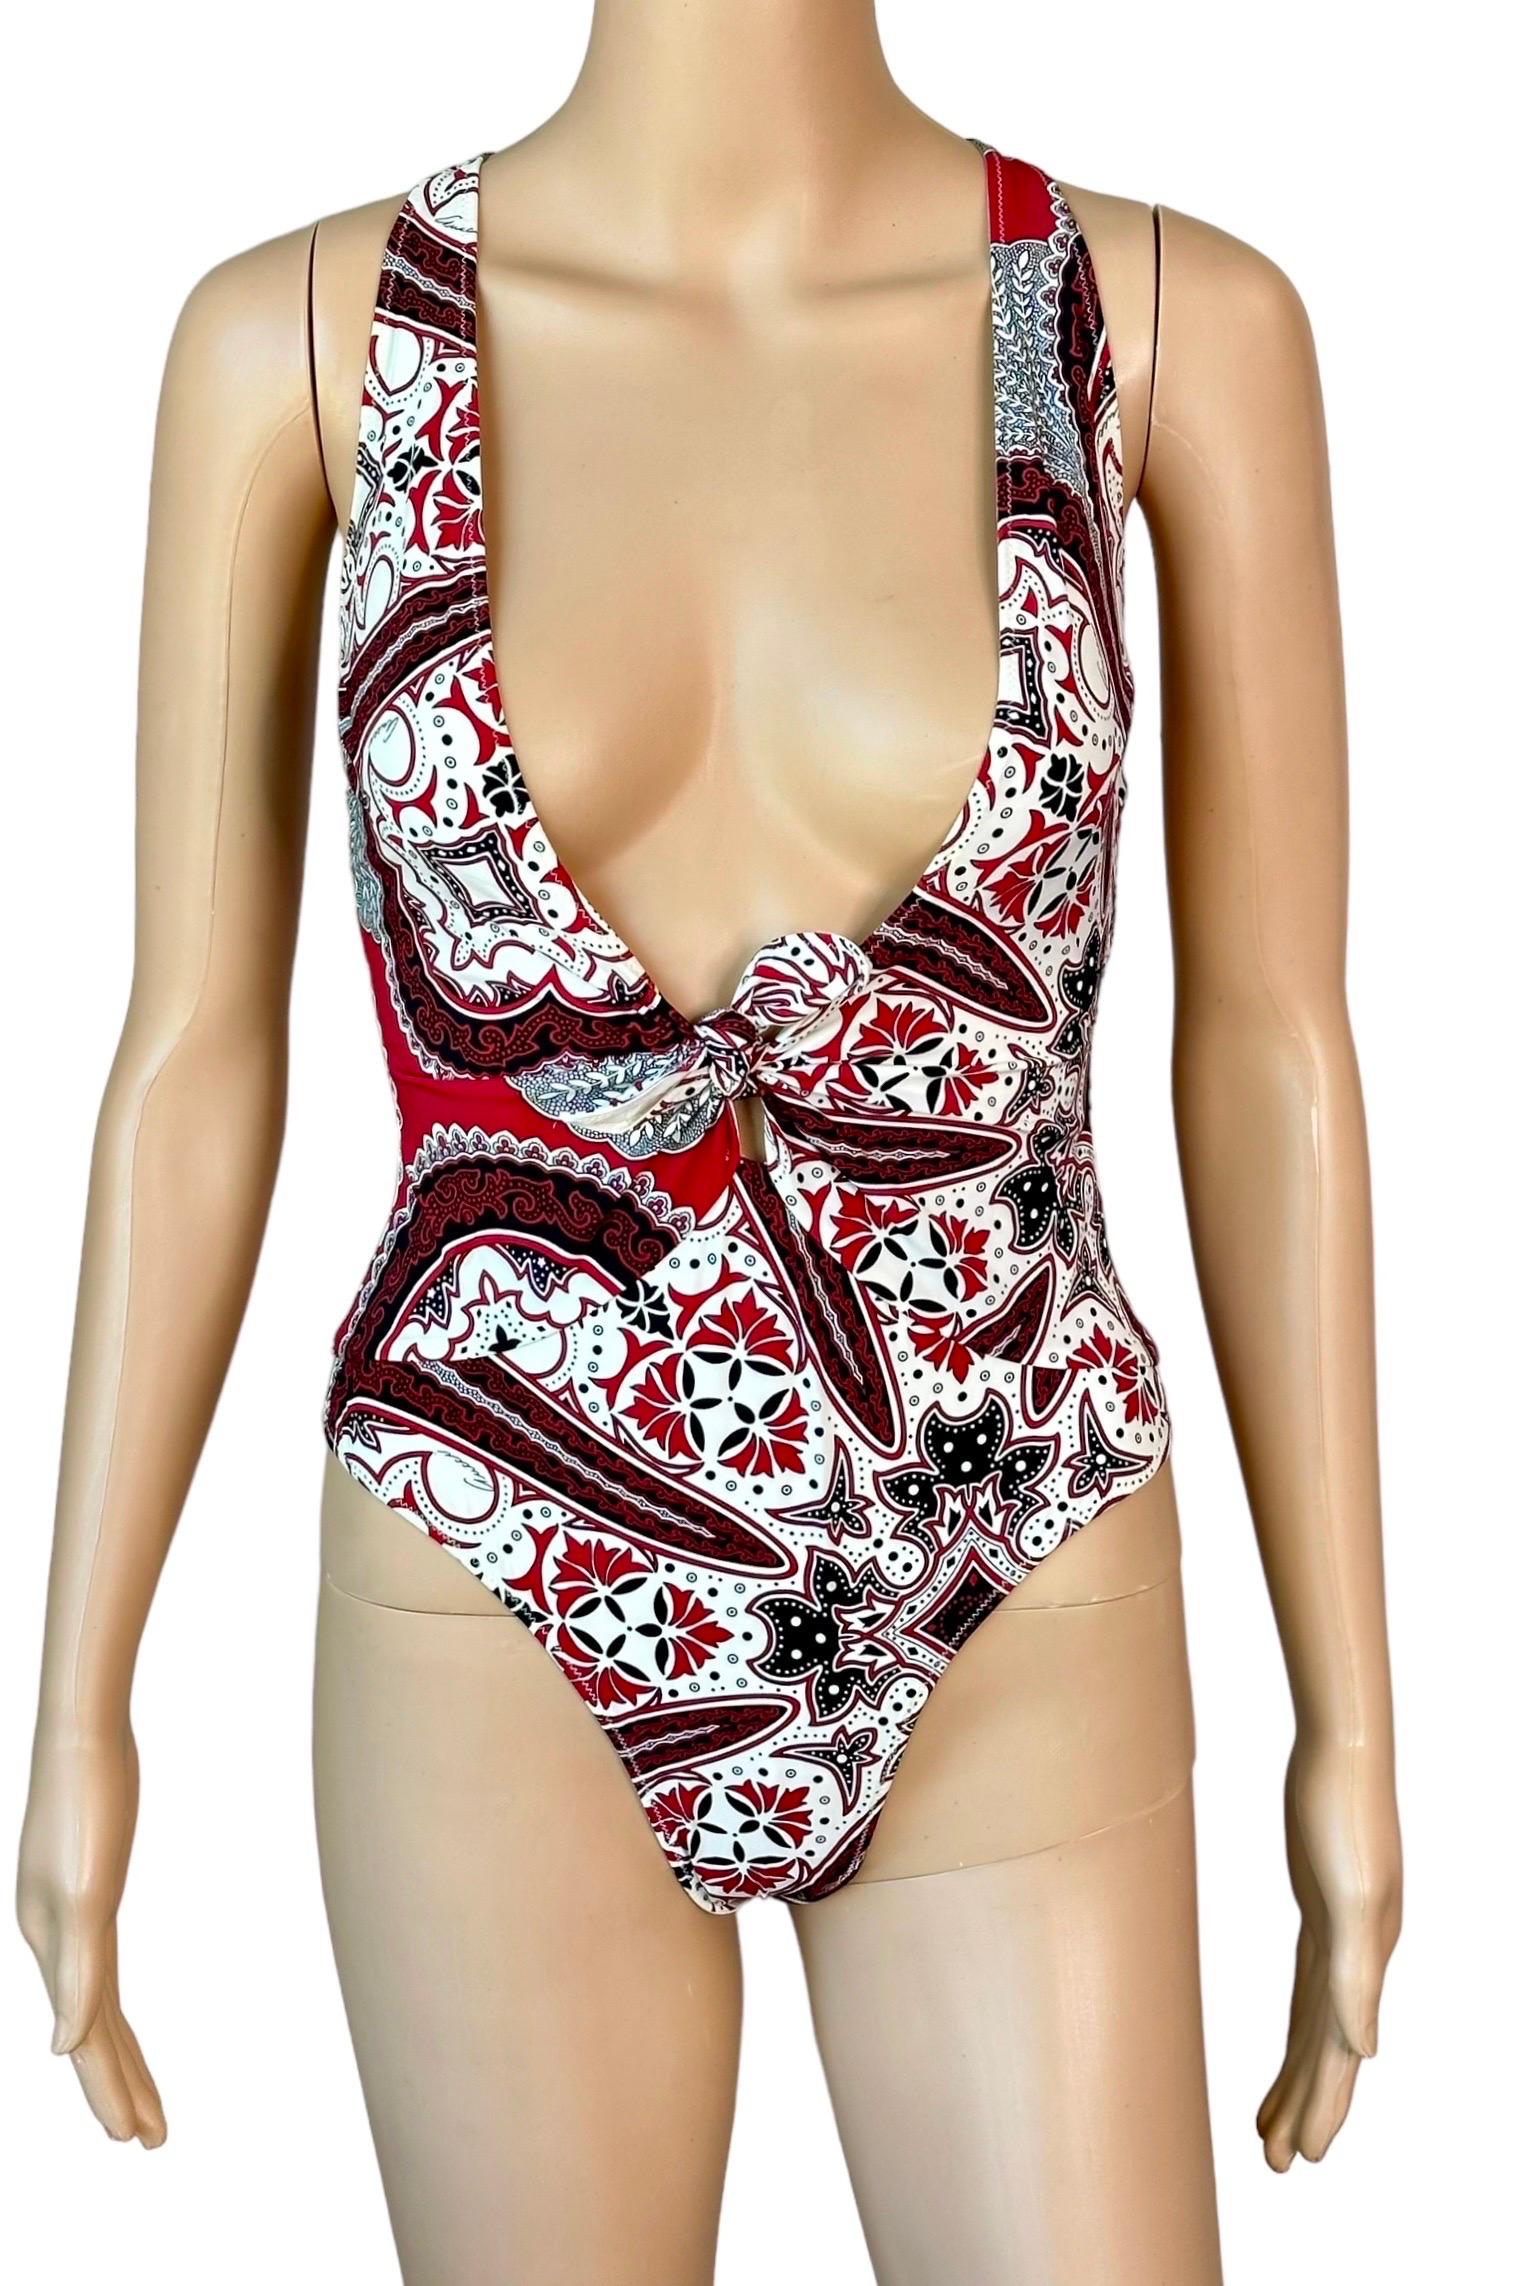 Tom Ford for Gucci Cruise 2004 Unworn Plunging Bow Bandana Print One Piece Bodysuit Swimsuit Swimwear Size S

Condition: New with Tags
